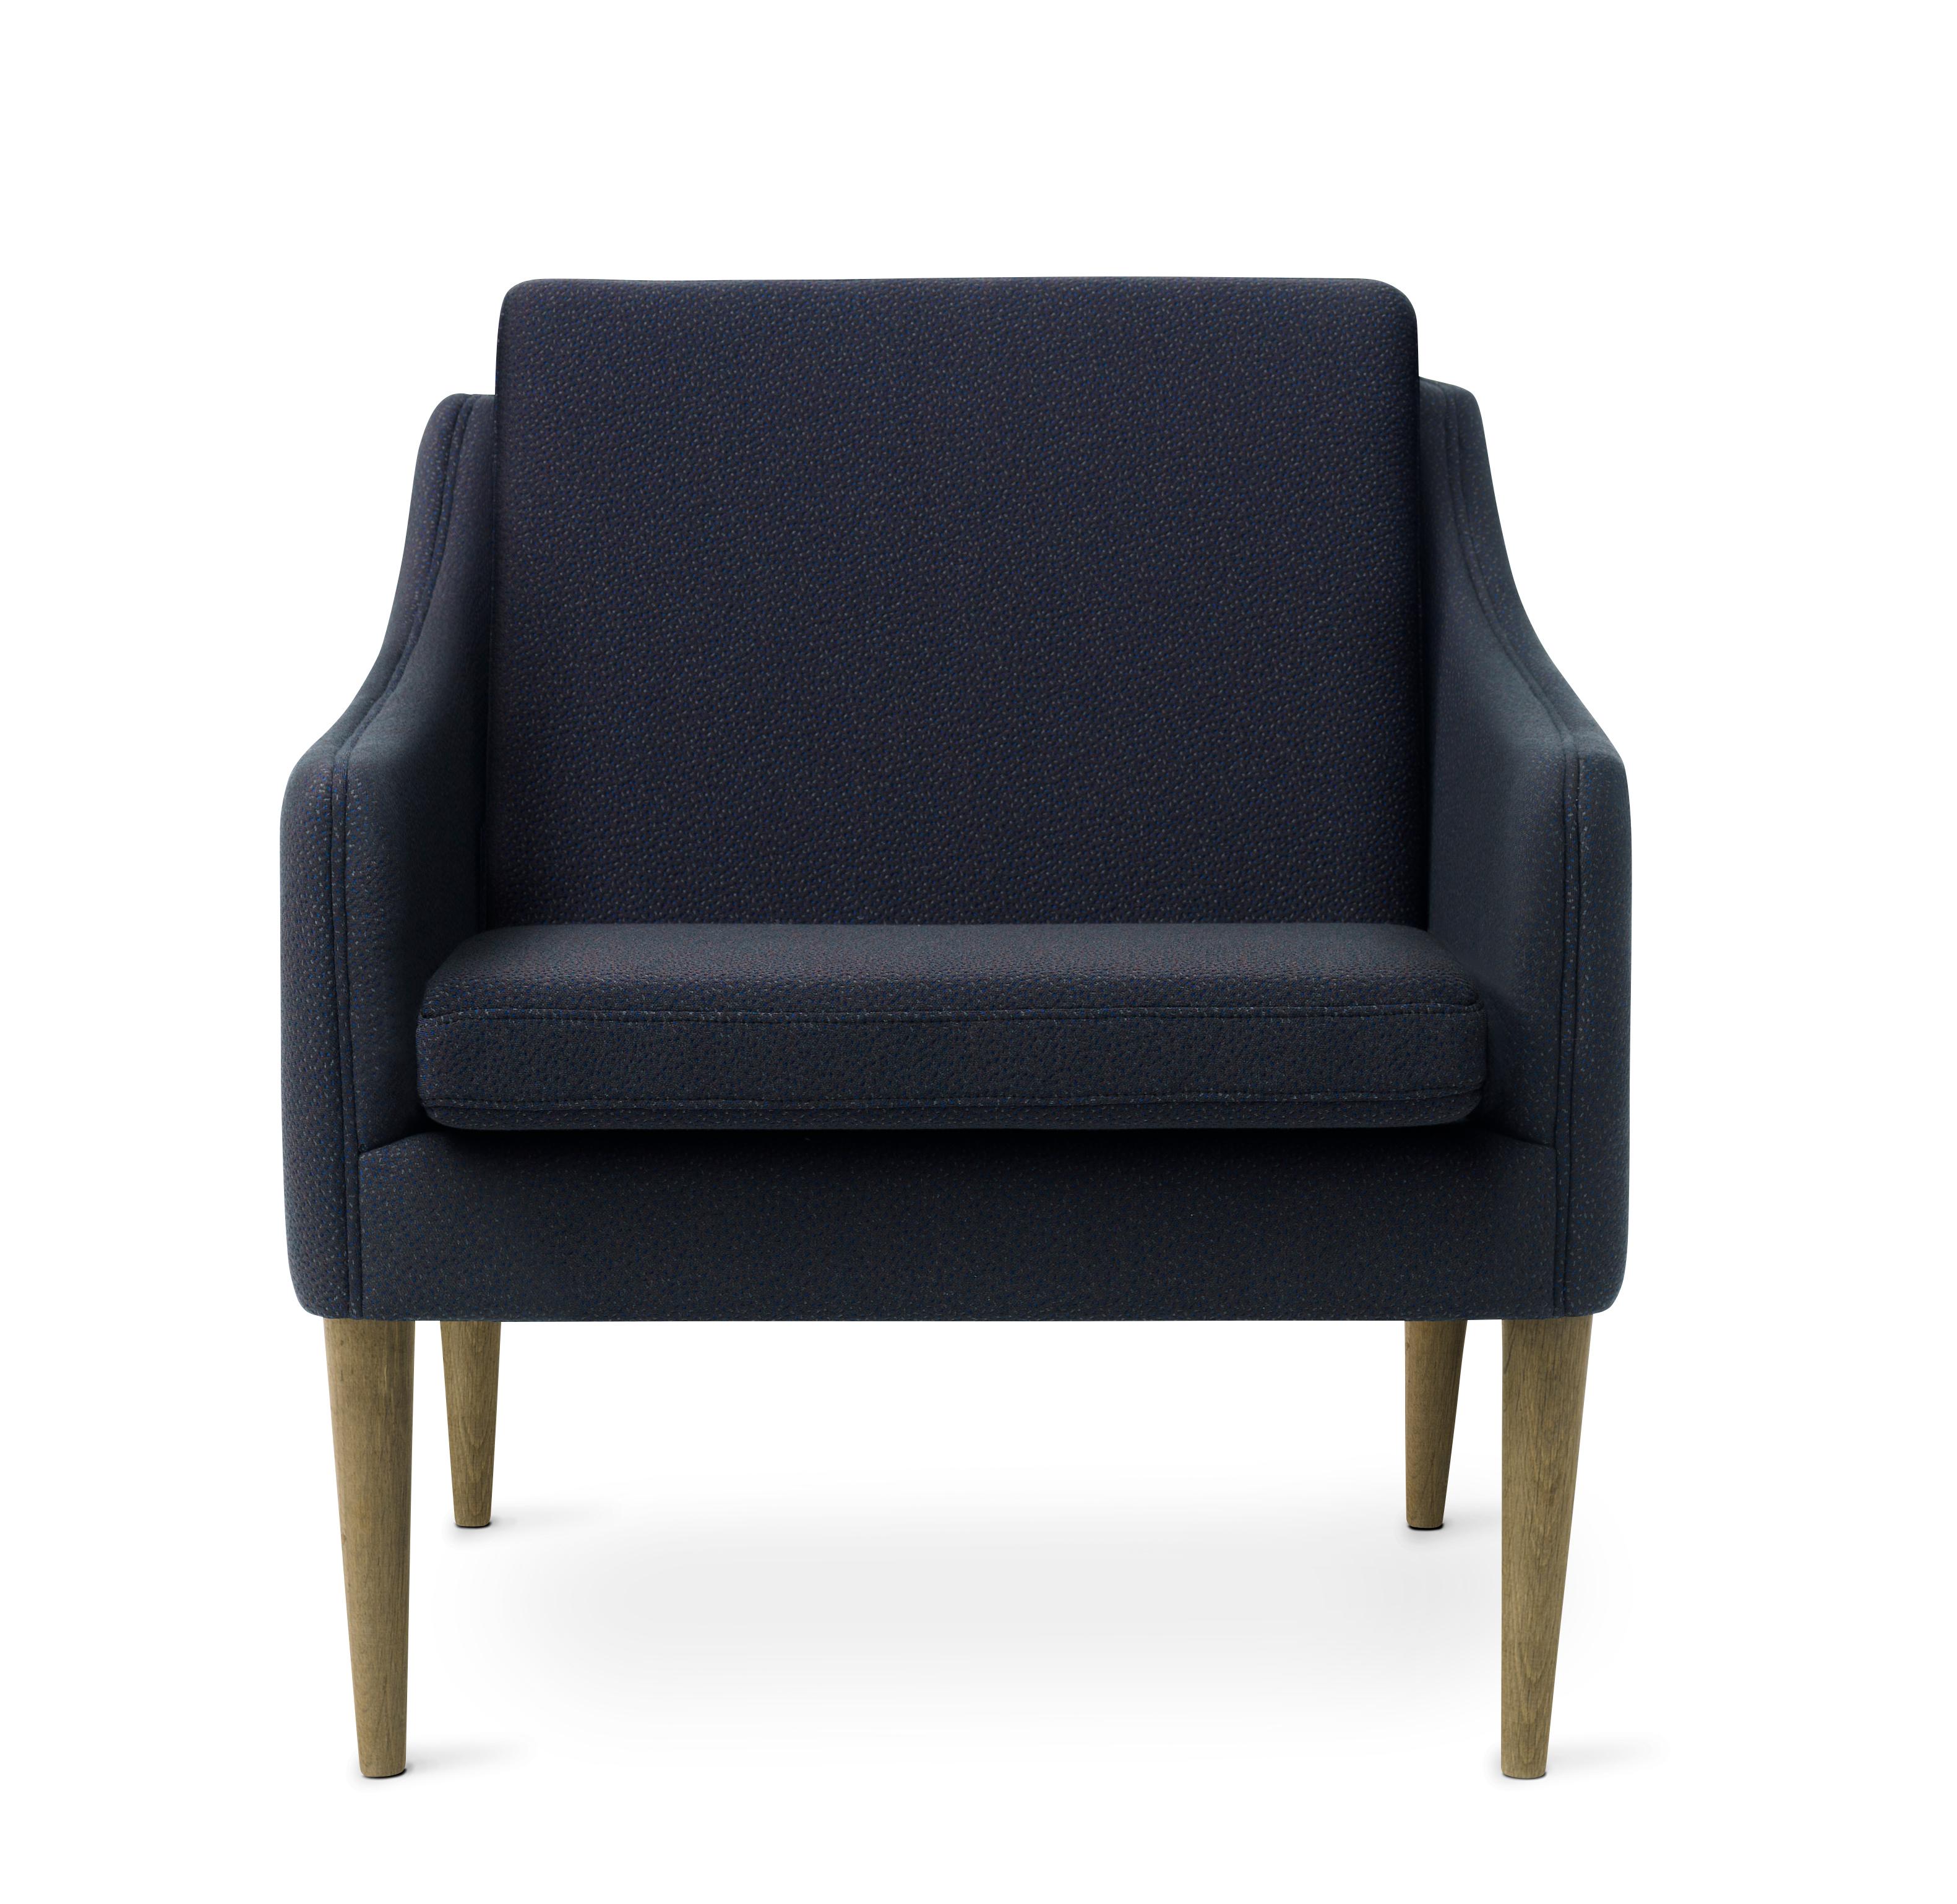 For Sale: Blue (Sprinkles 794) Mr. Olsen Lounge Chair with Smoked Oak Legs, by Hans Olsen from Warm Nordic